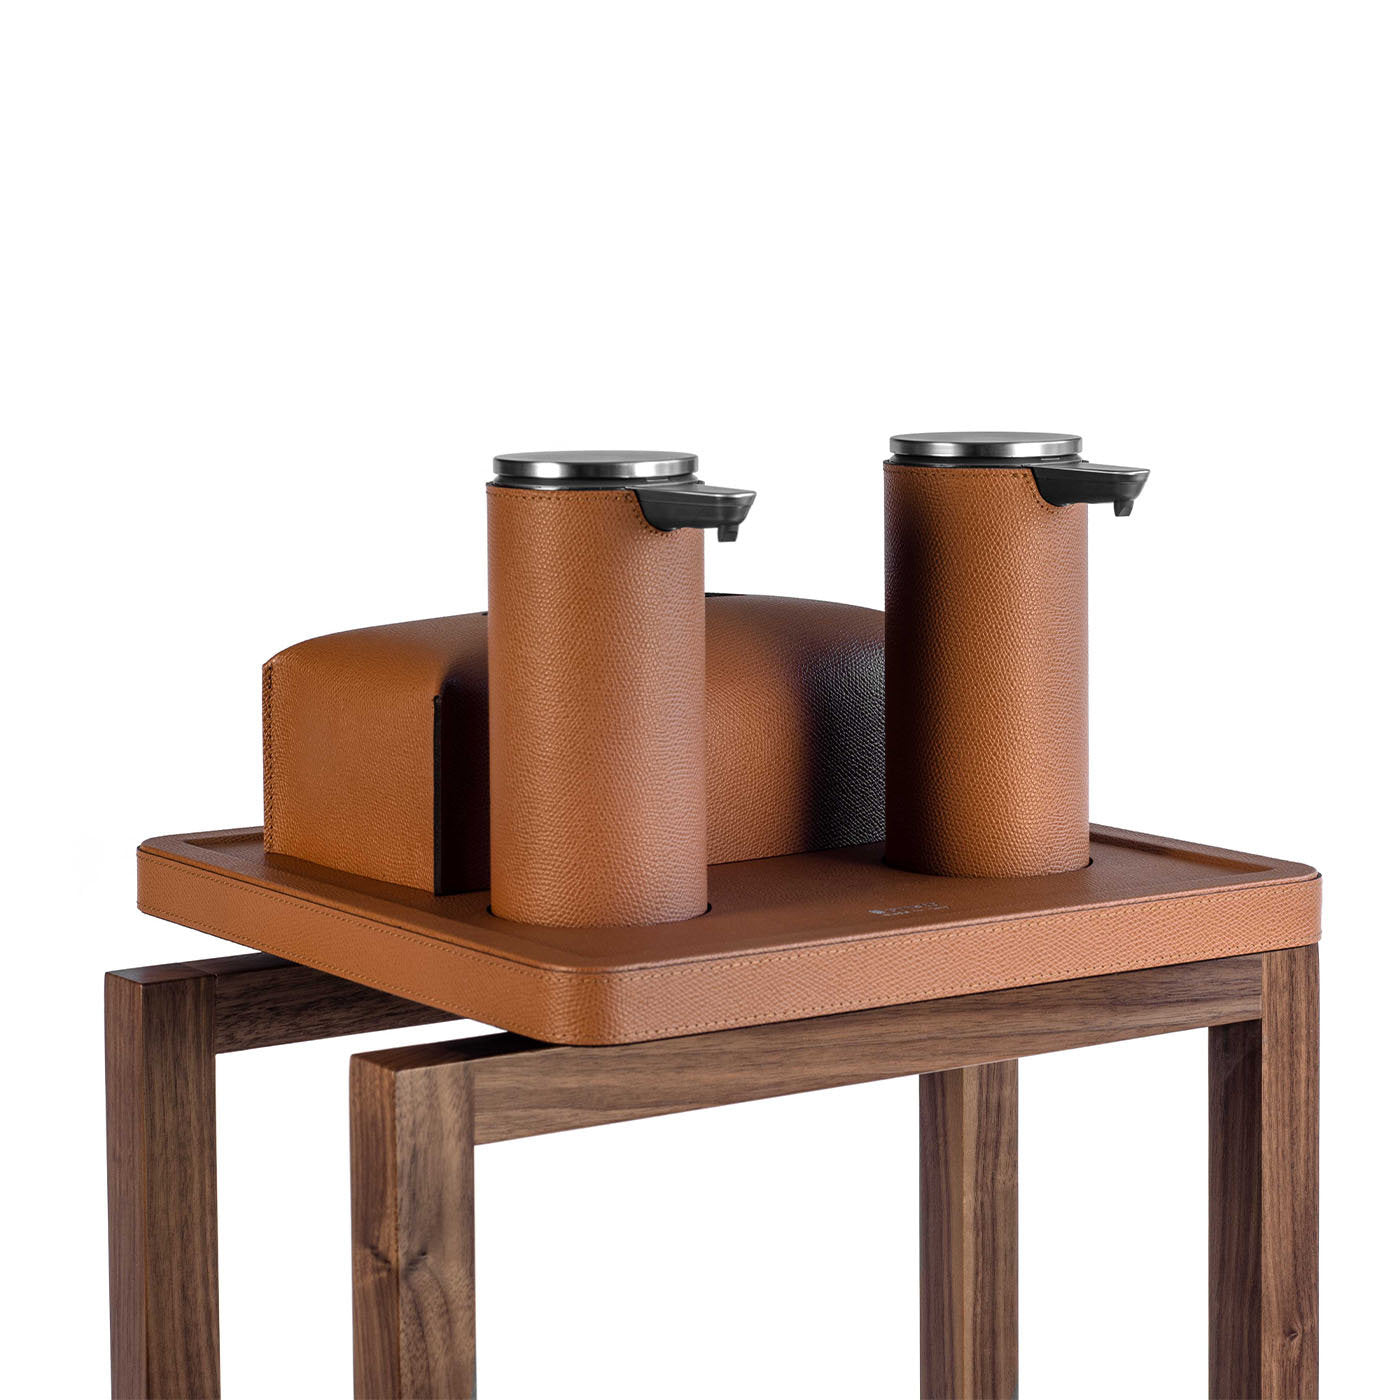 Igea Brown Leather and Walnut Sanitizing Station - Alternative view 1